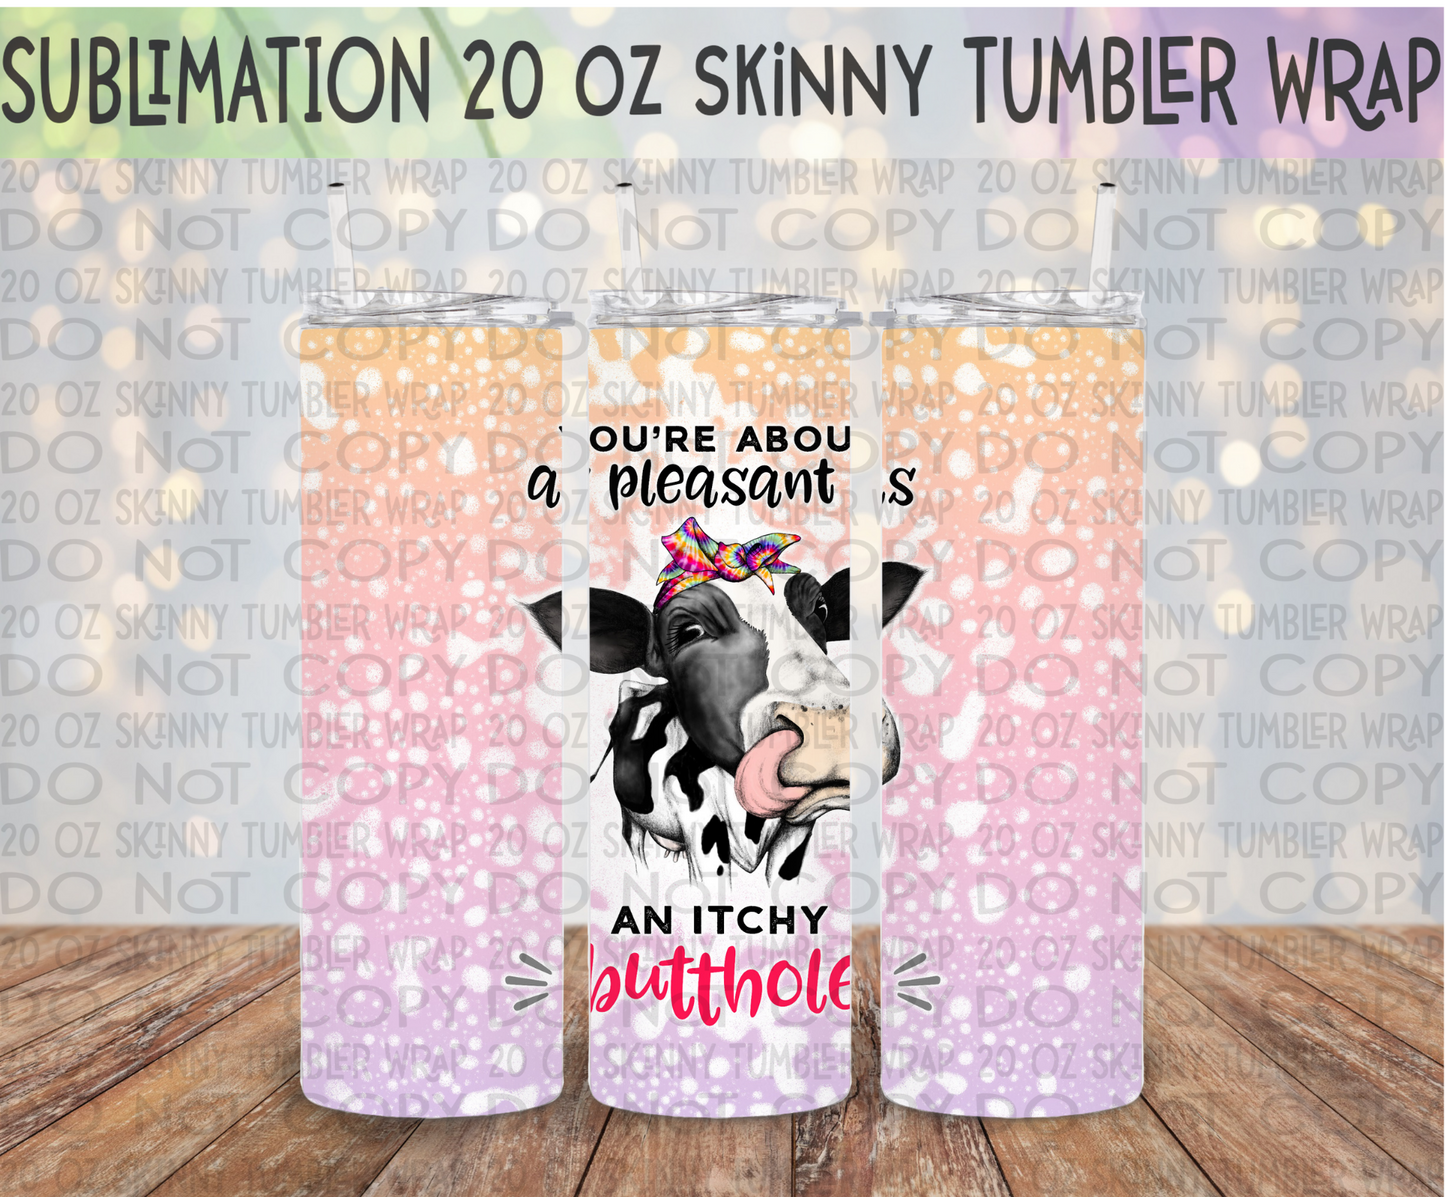 You're About as Pleasant as an Itchy Butthole 20 Oz Skinny Tumbler Wrap - Sublimation Transfer - RTS